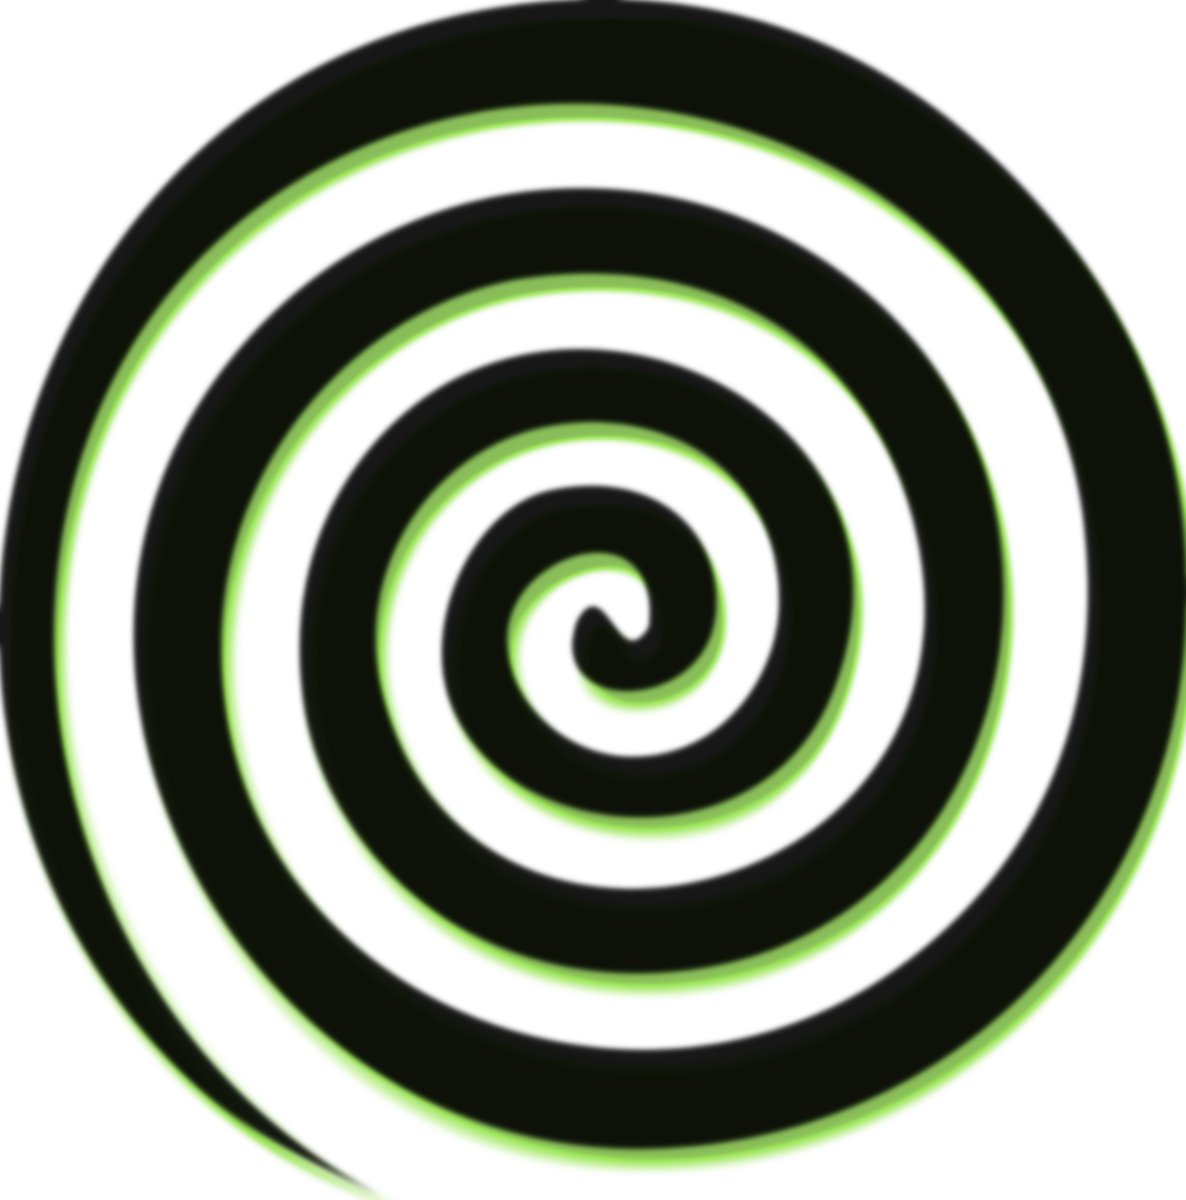 some sort of black and white swirl with green highlights